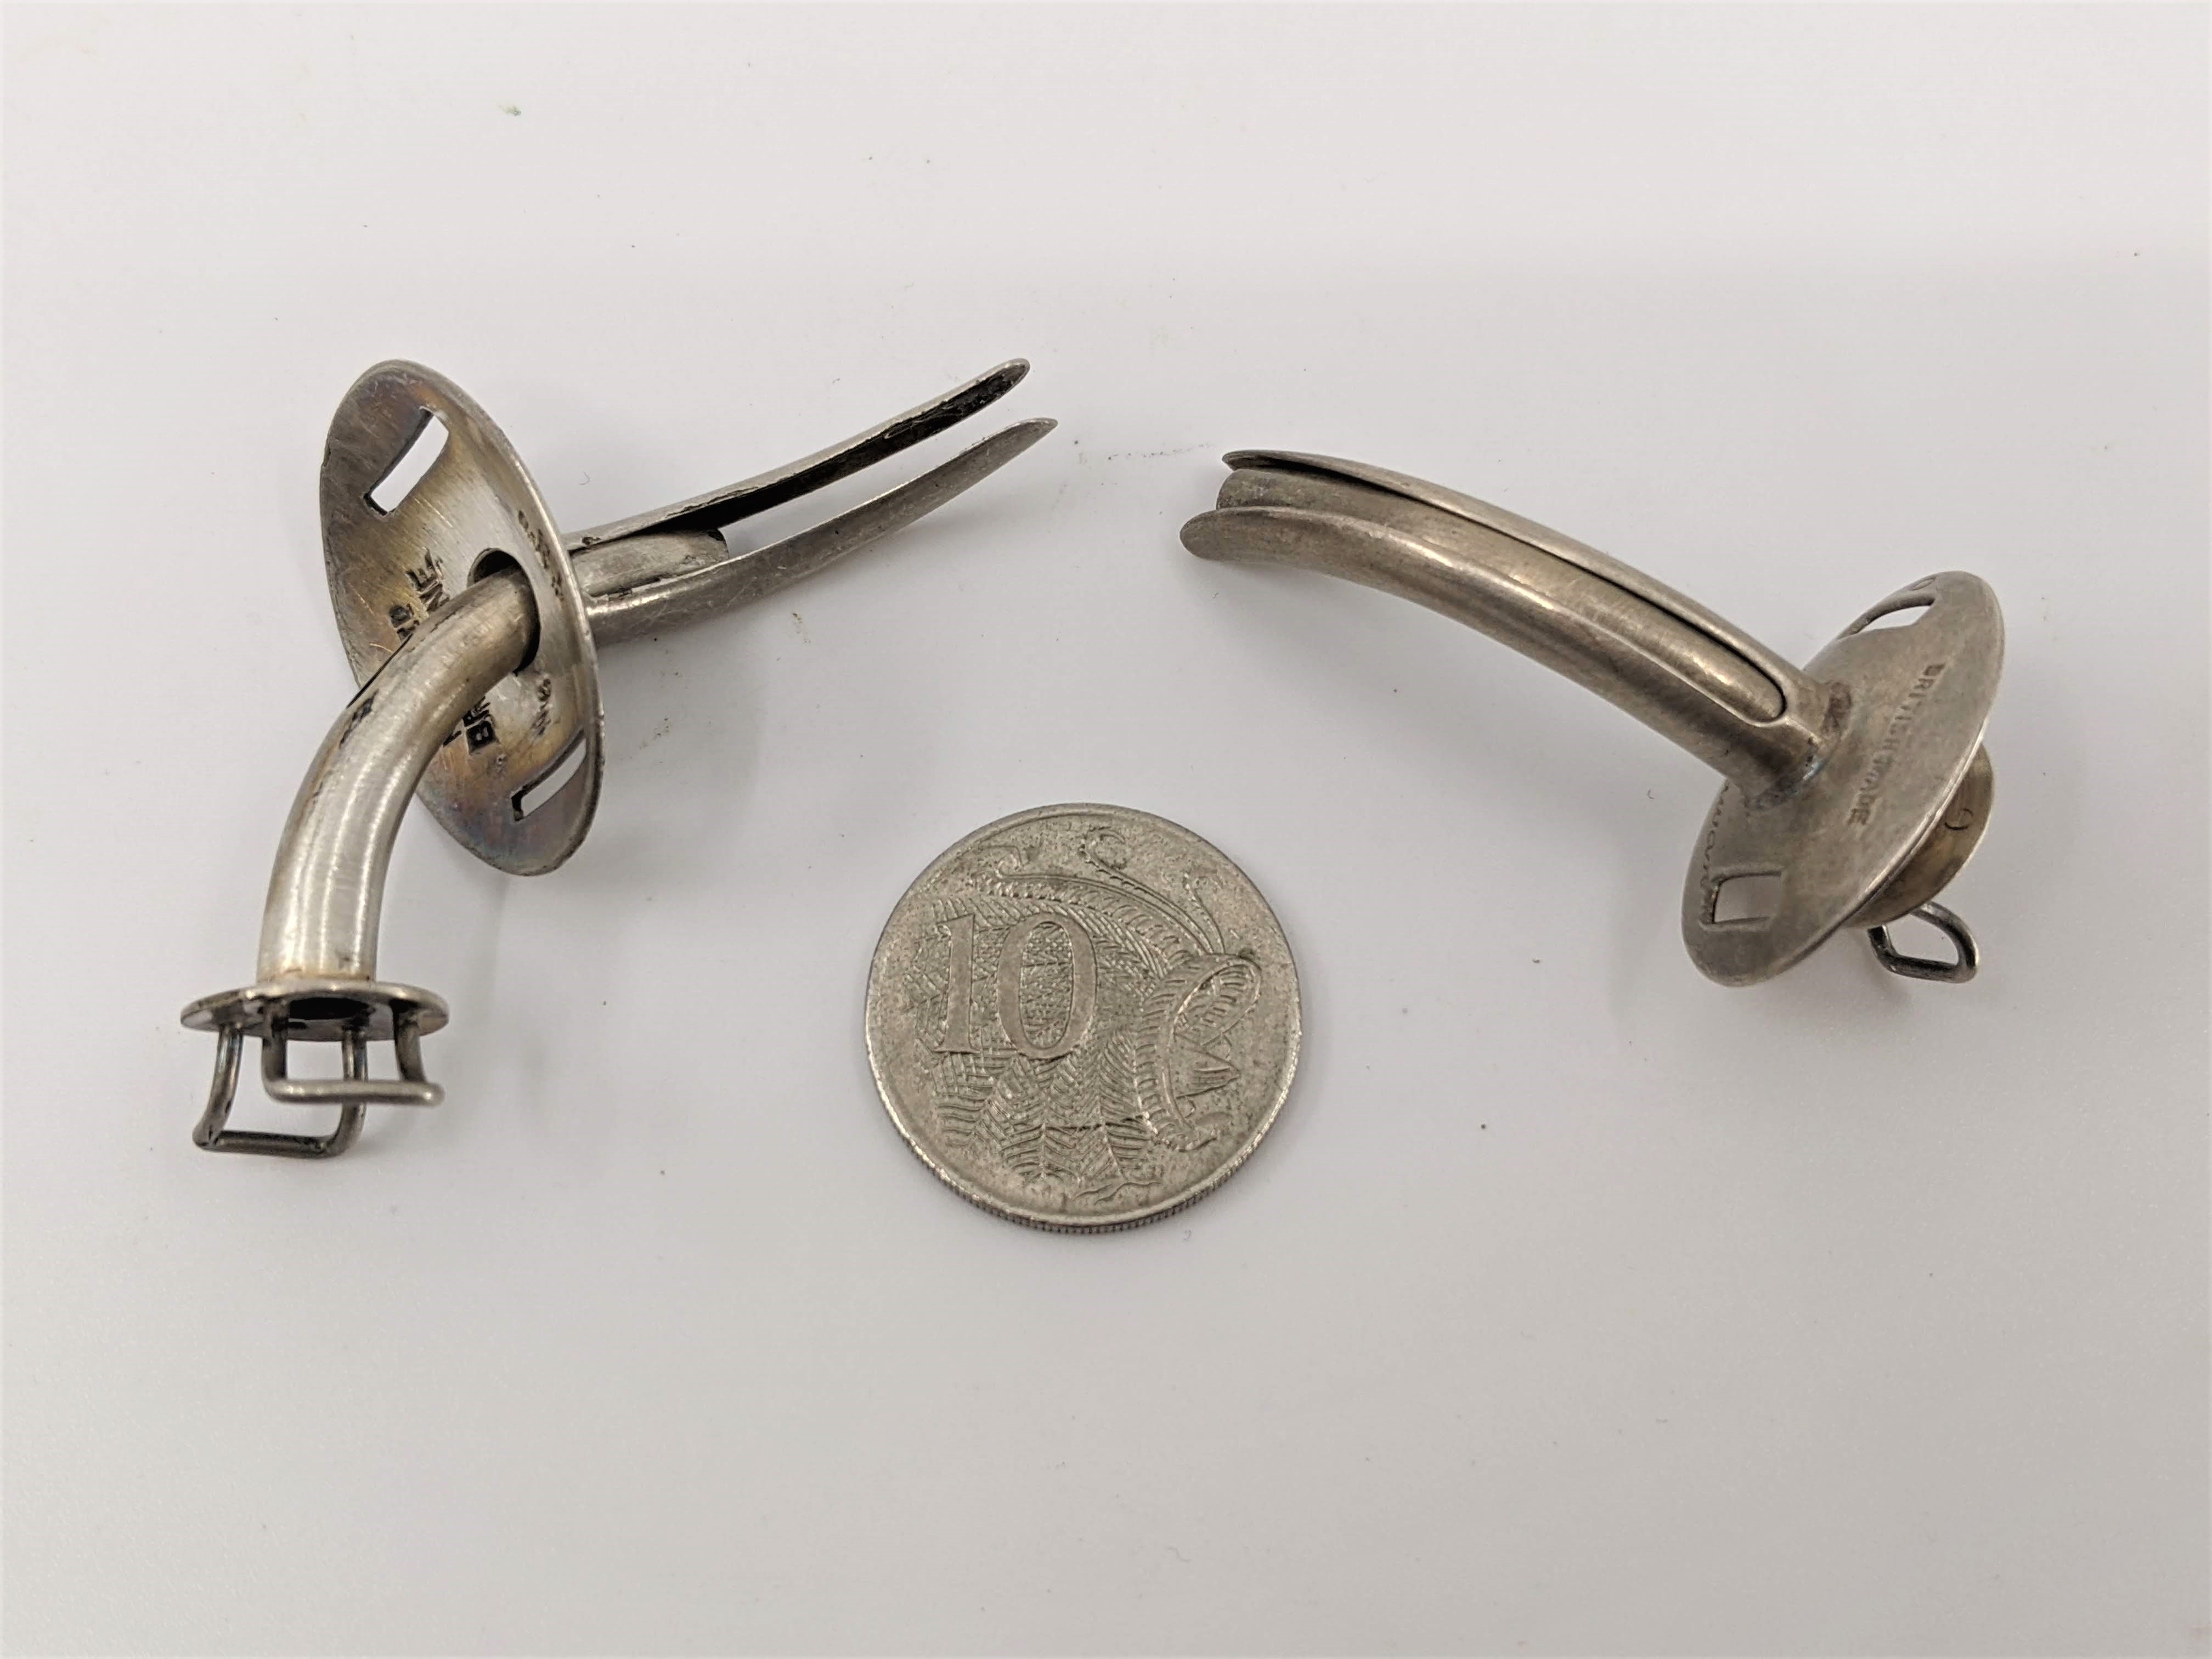 Silver paediatric tracheotomy tubes, from the collection of the Marks-Hirschfeld Museum of Medical History 